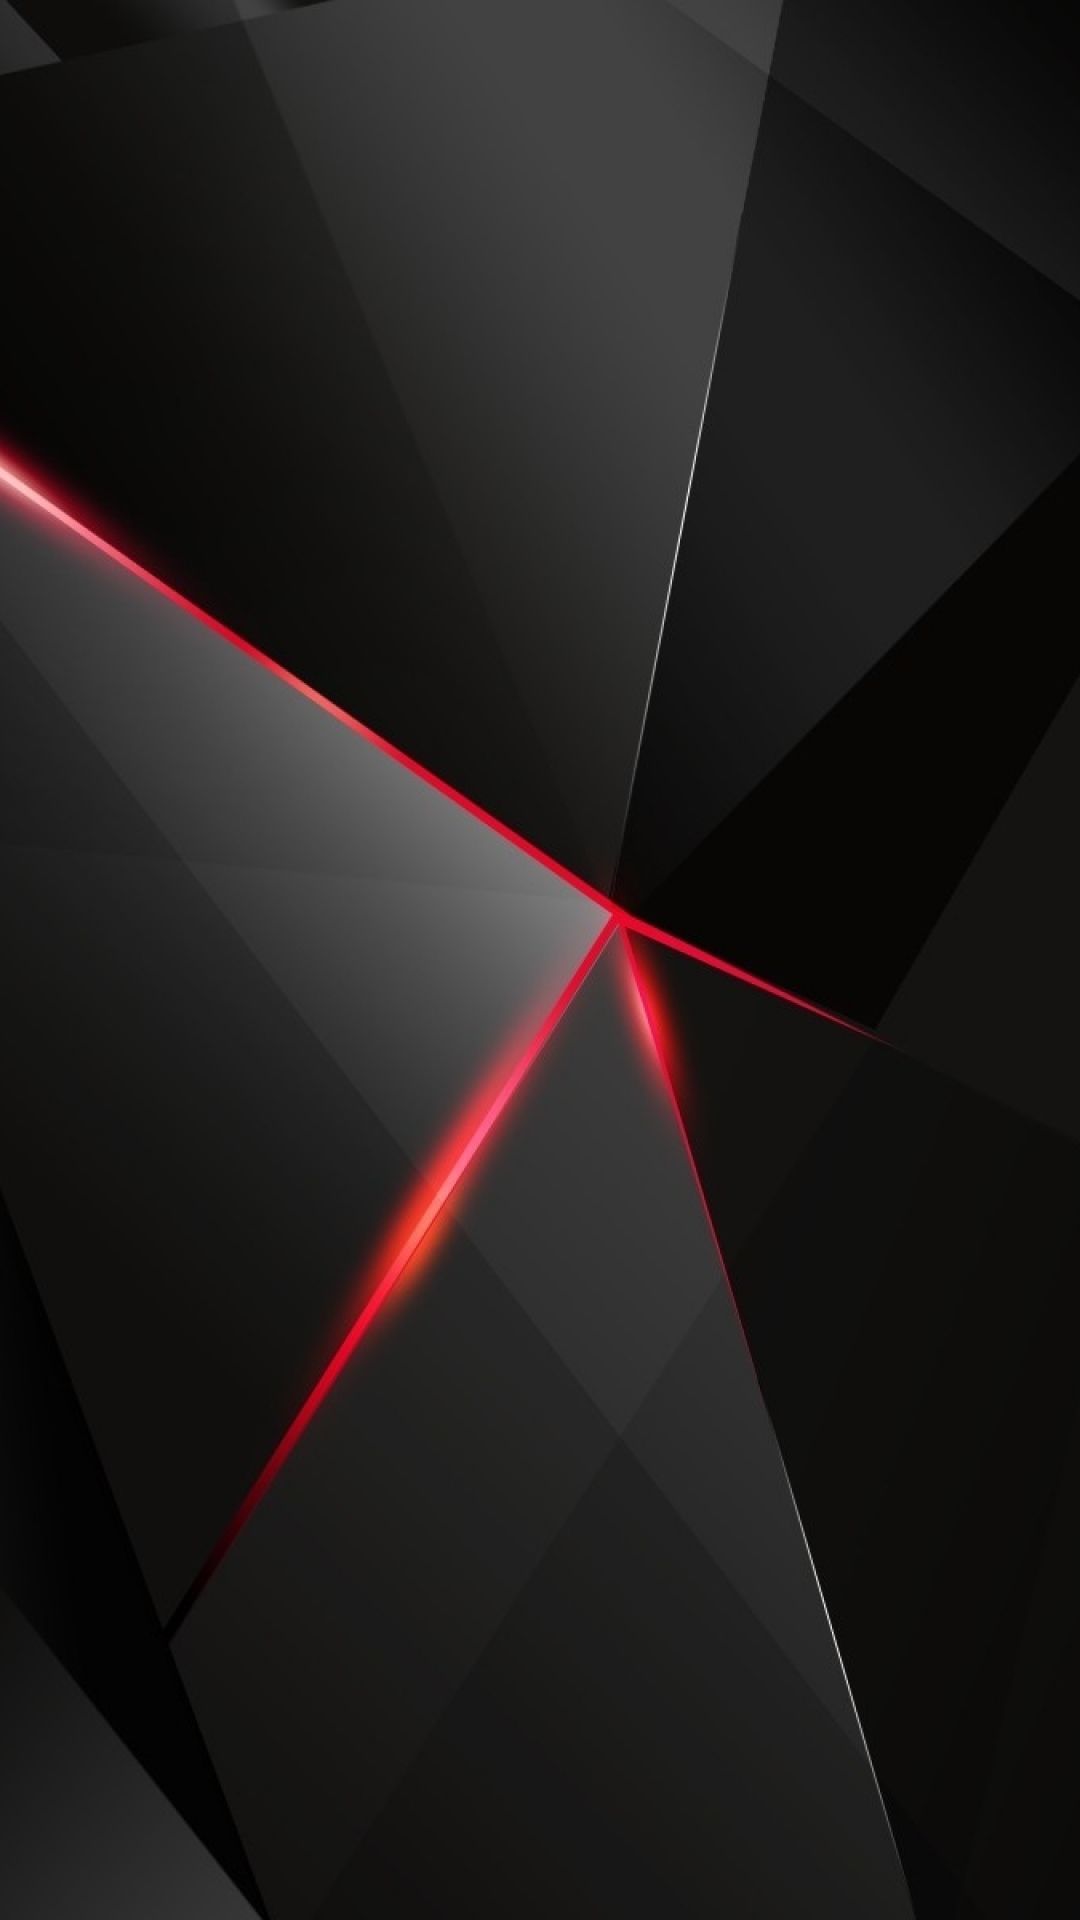 1080x1920 - Android Live Wallpapers, Android wallpapers, Android ...